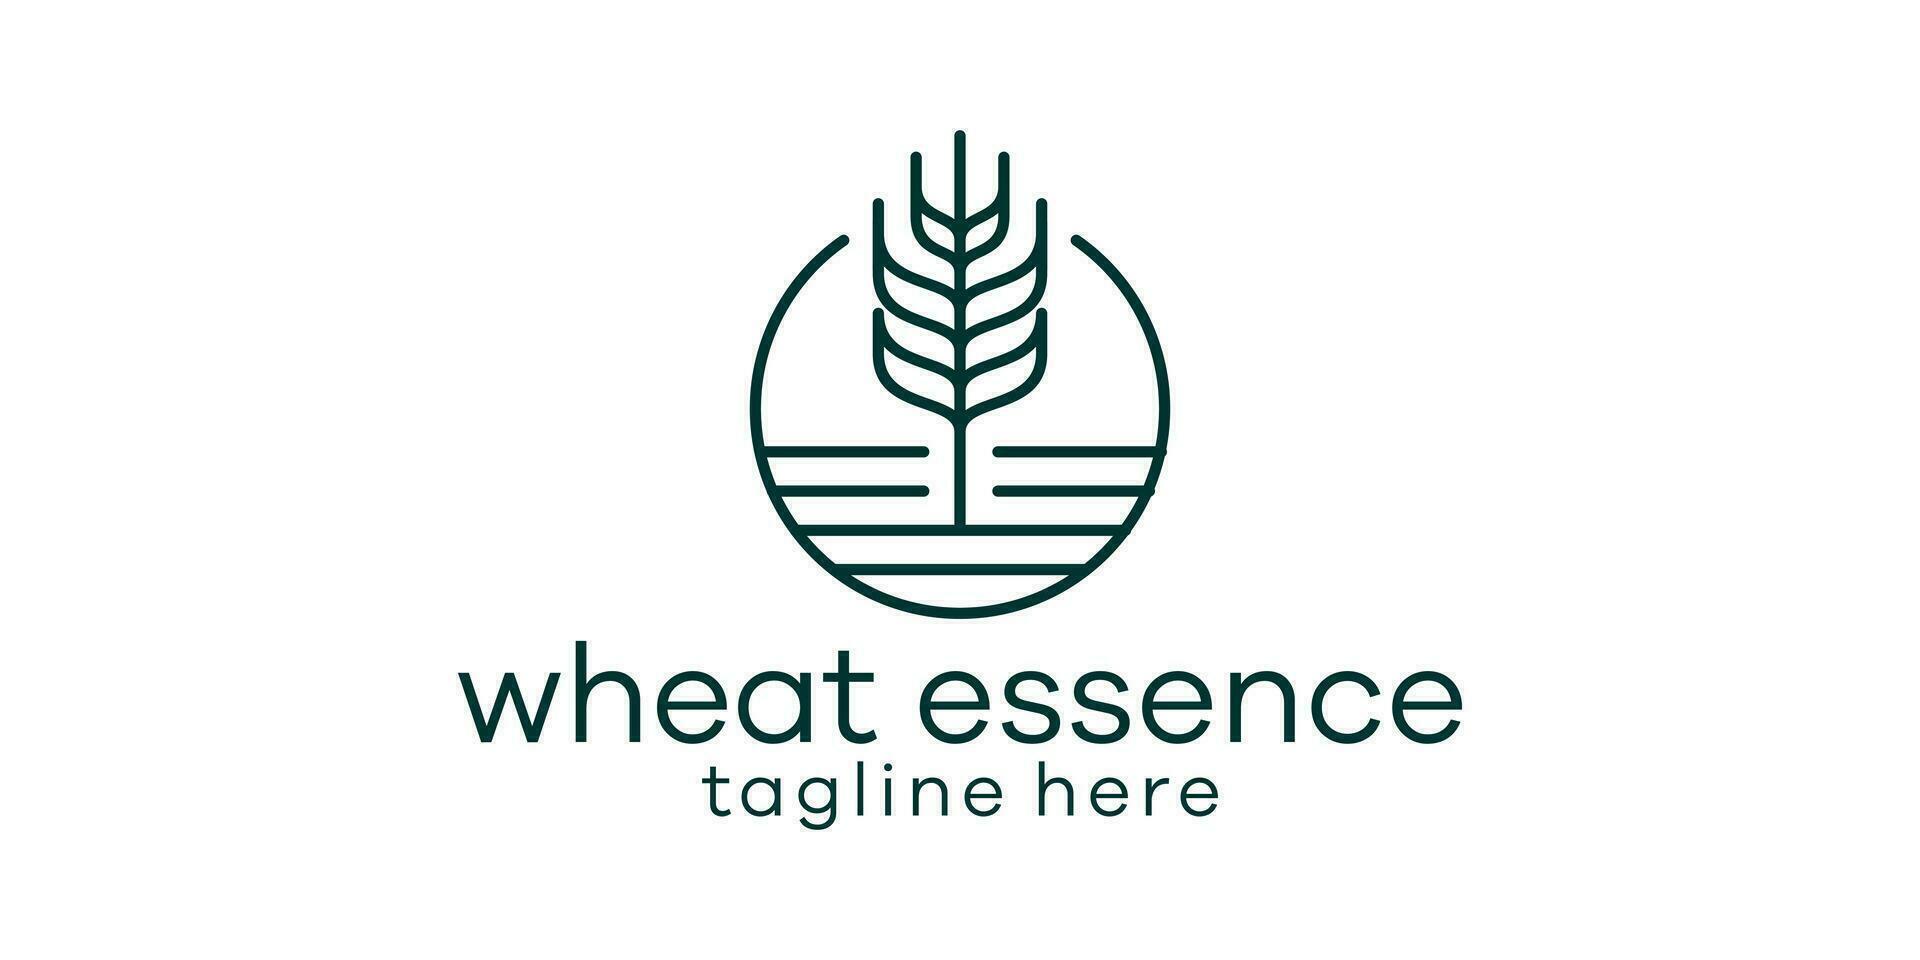 logo design combining the shape of a wheat plant with a circle, agricultural logo design, vector